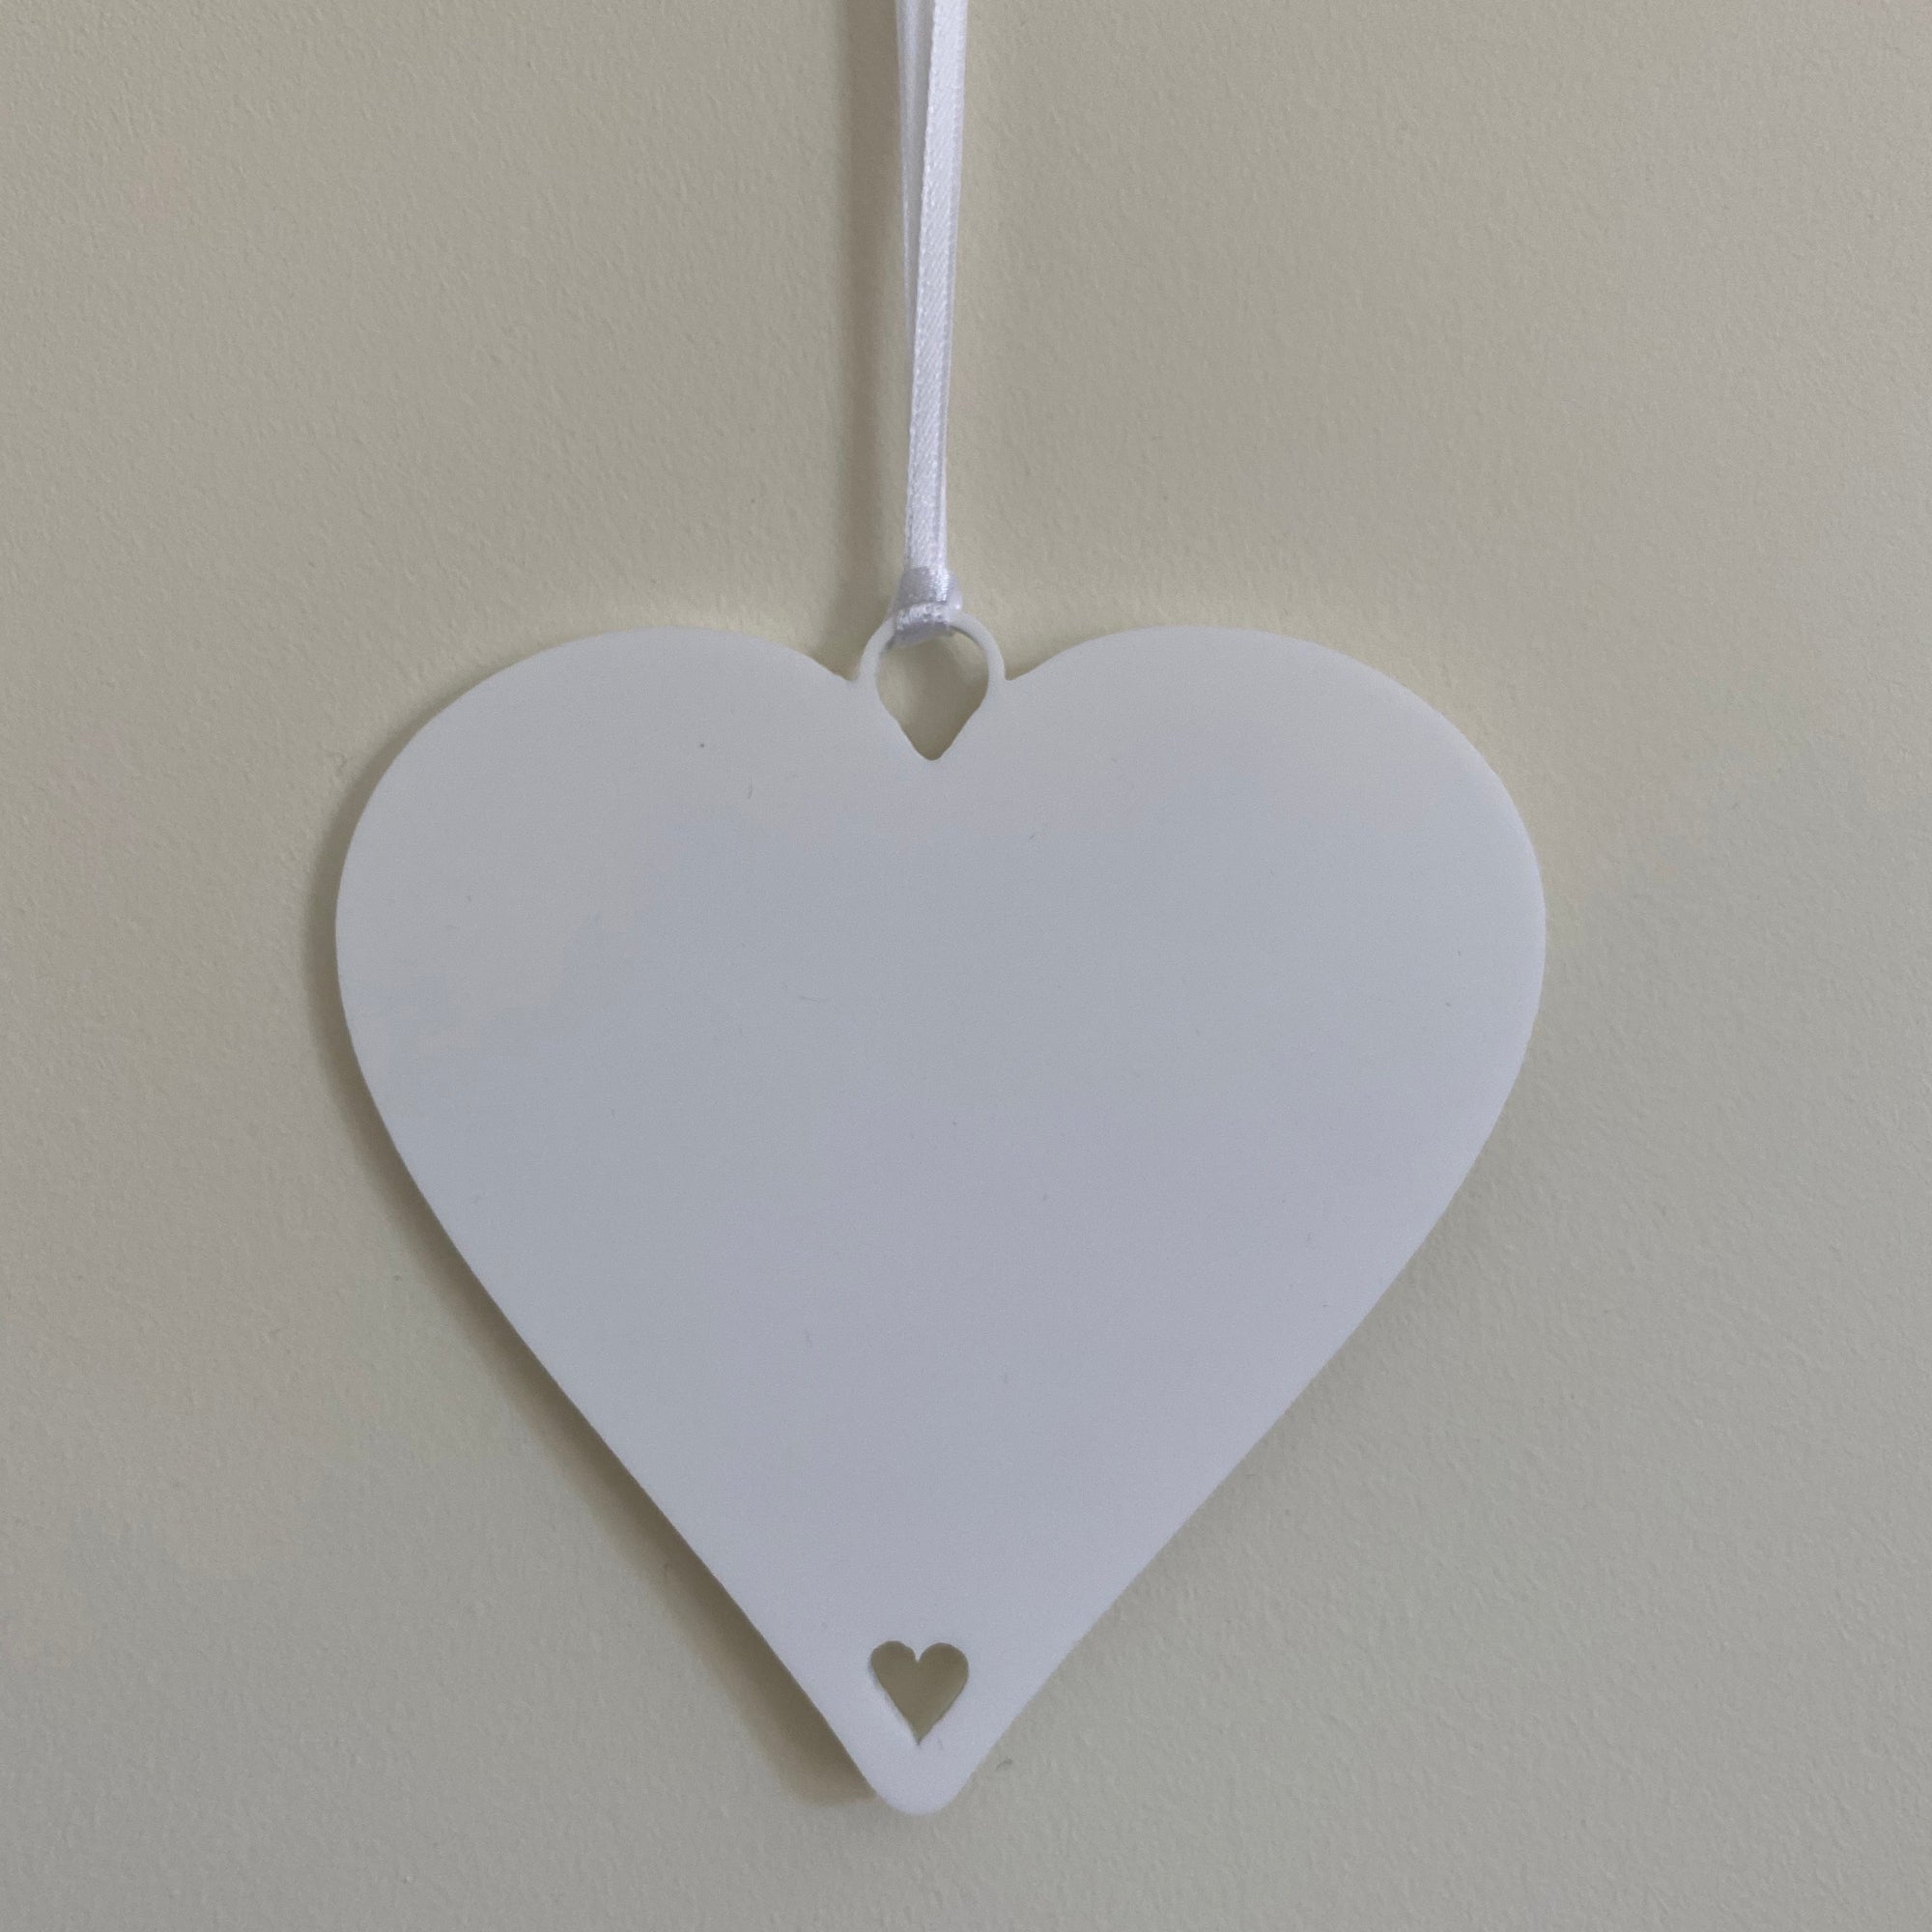 Personalised Botanical Leaves Hanging Plaque Gift for Her - 10cm Heart